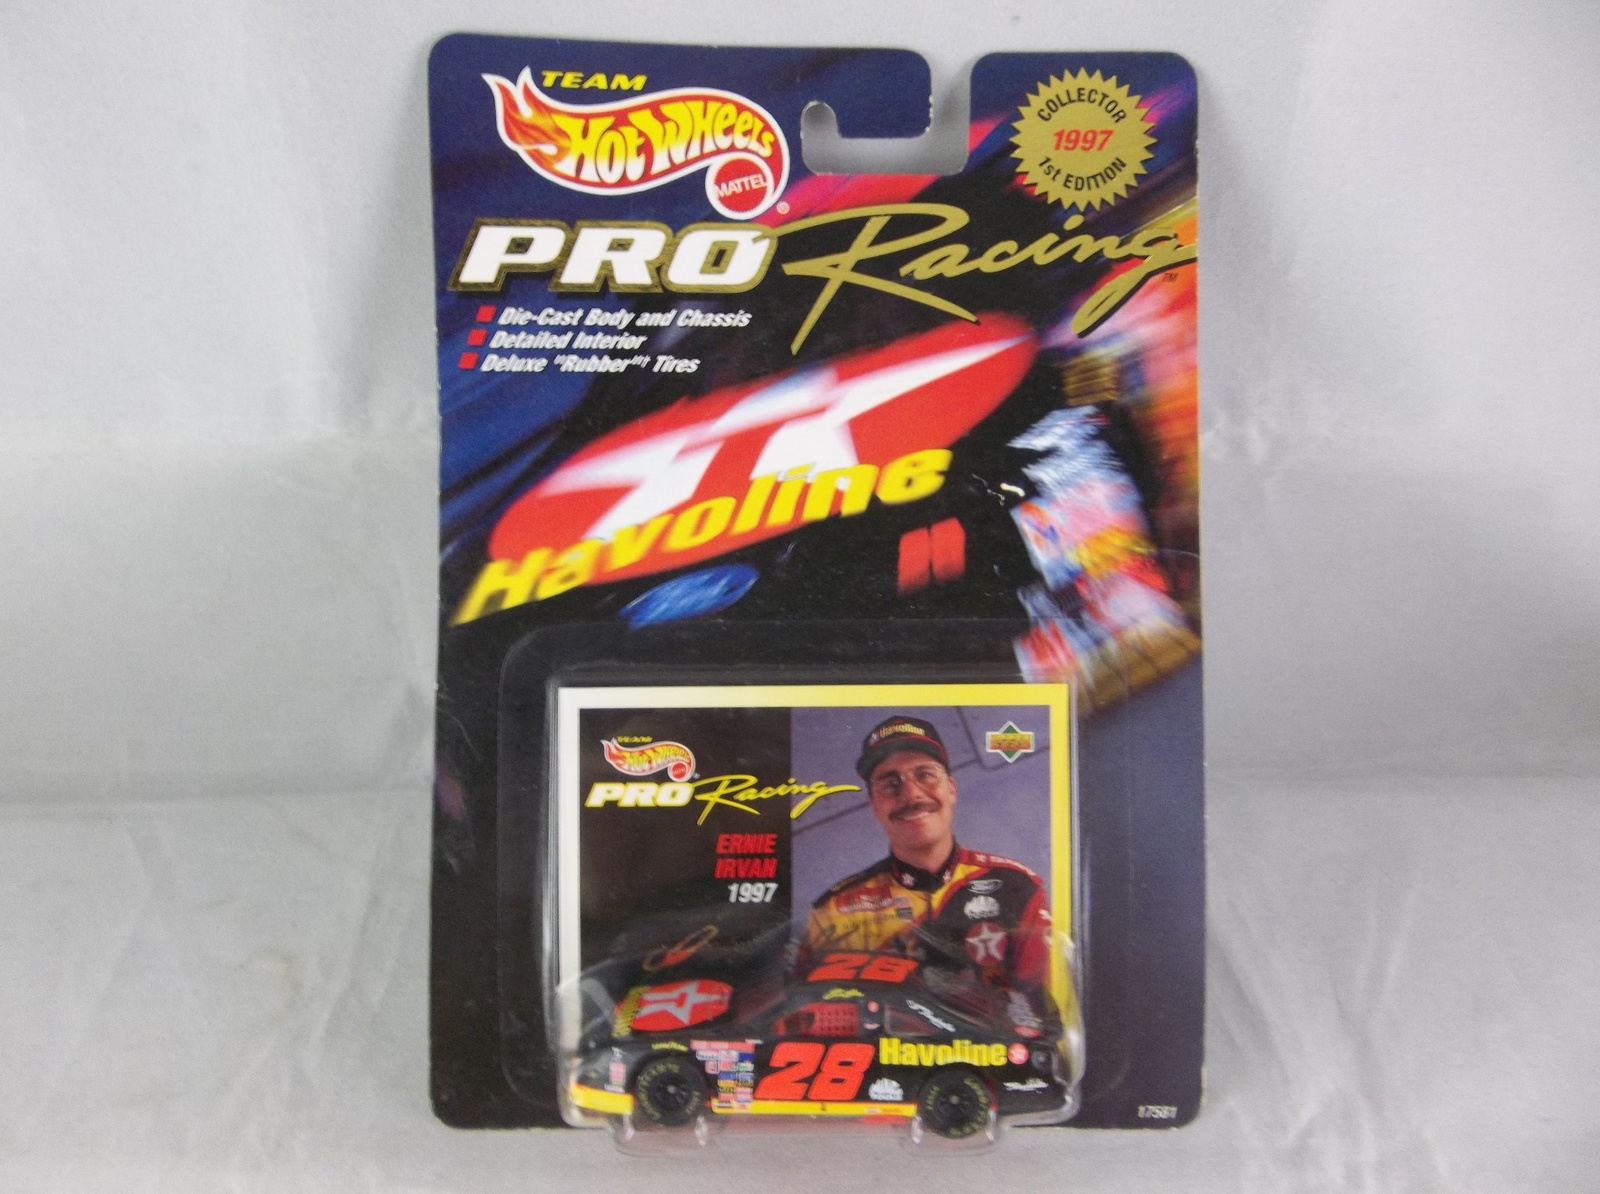 Primary image for Team Hot Wheels 1997 Collector 1st Edition #28 Ernie Irvan Diecast Racecar